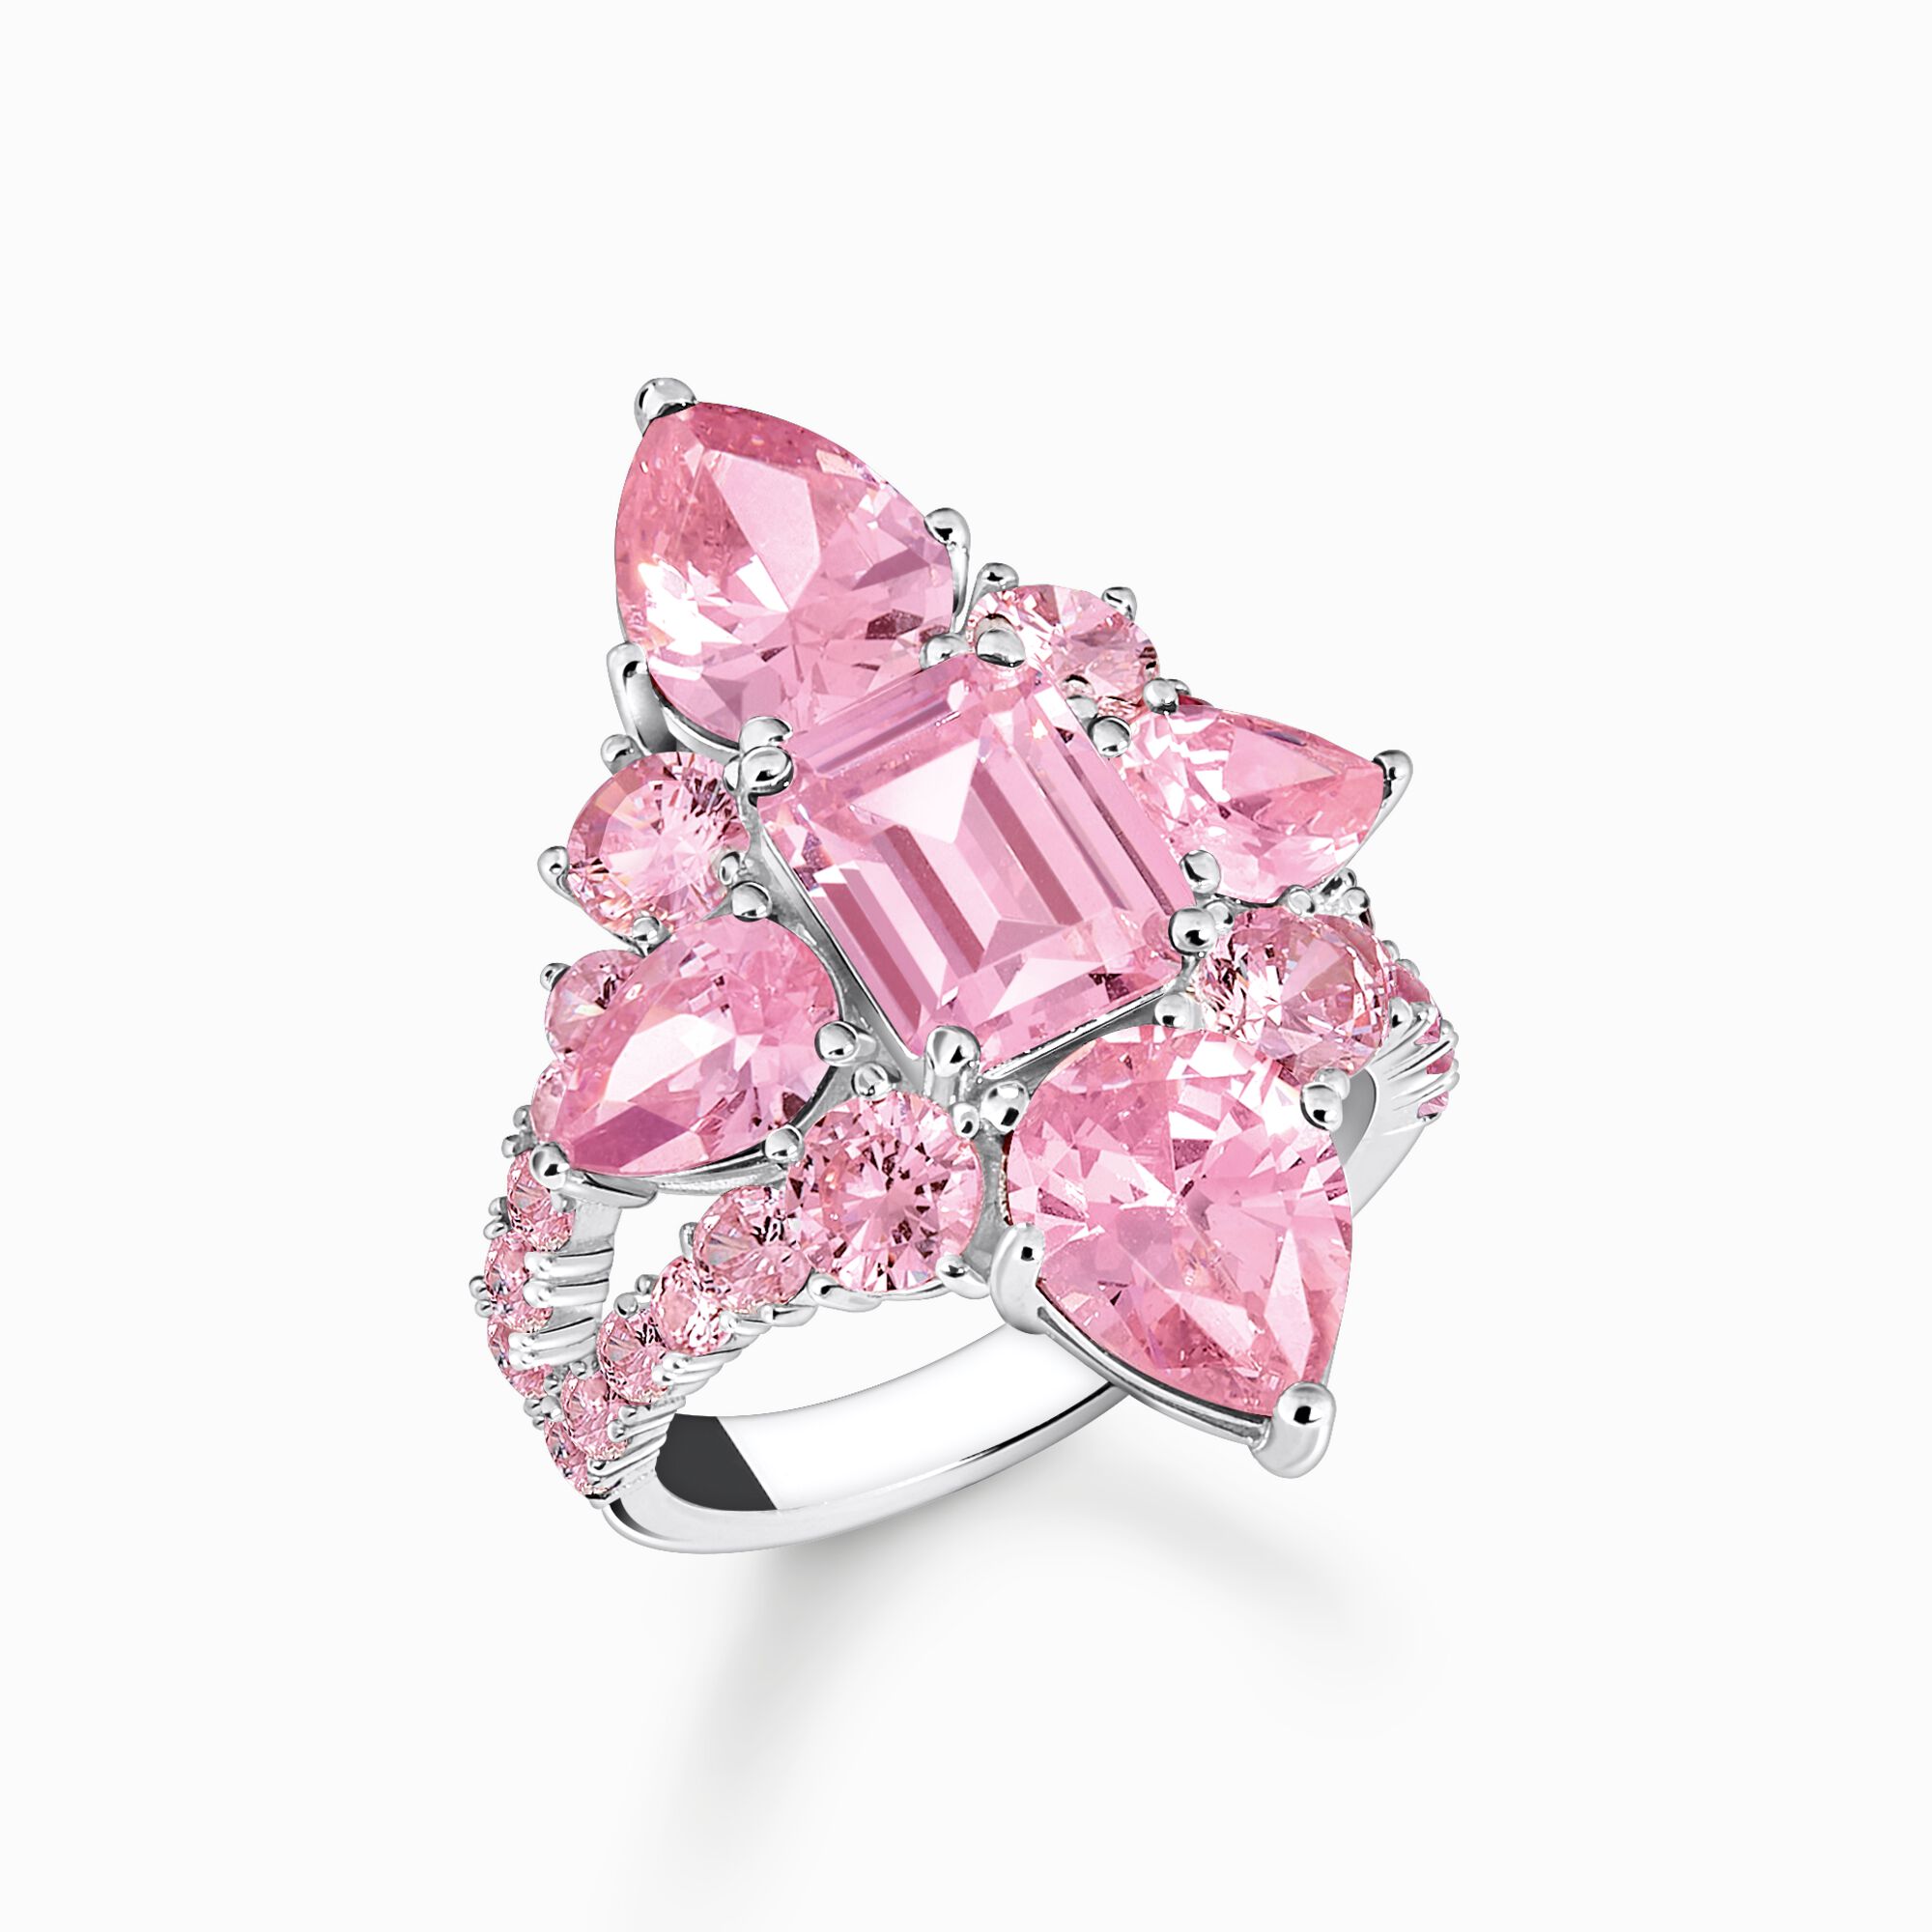 Silver cocktail ring with pink zirconia stones from the  collection in the THOMAS SABO online store